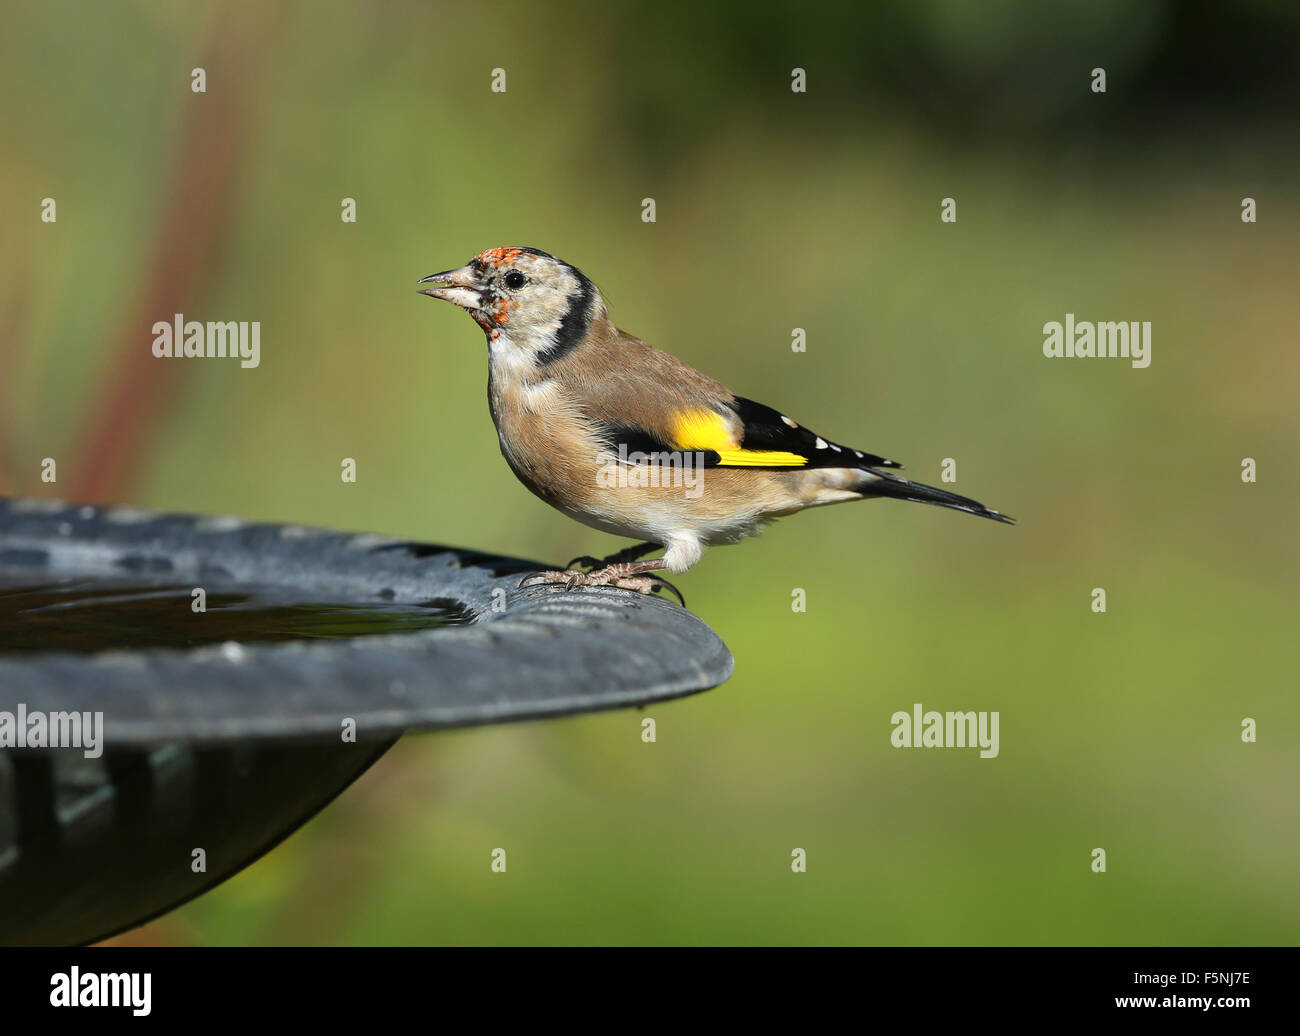 Close up of a young Goldfinch having a drink from a bird bath Stock Photo